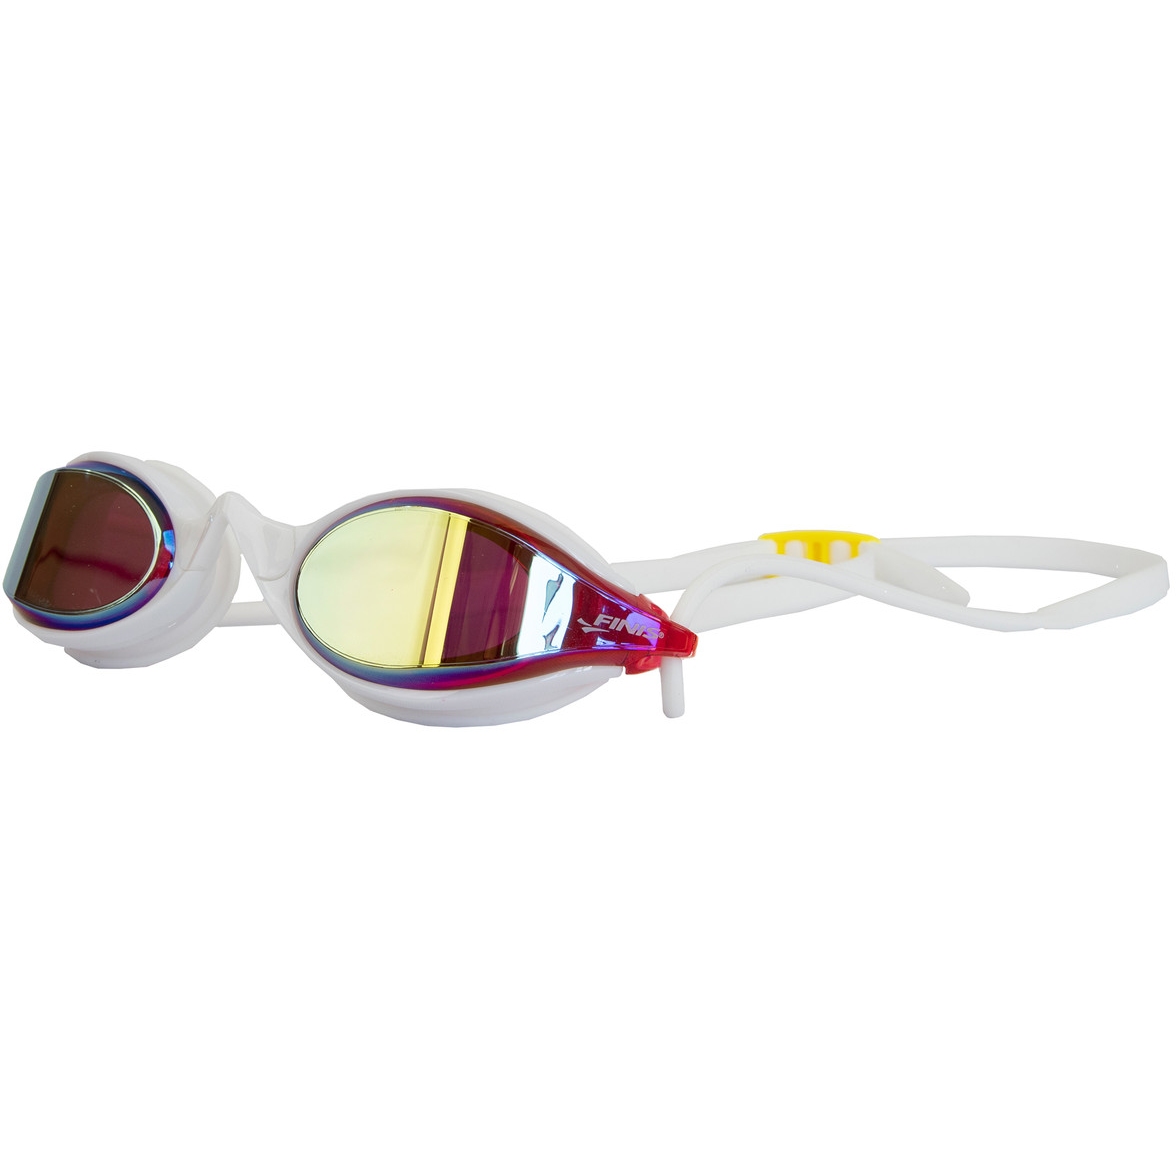 Picture of FINIS, Inc. Circuit 2 Goggle - red/yellow mirror